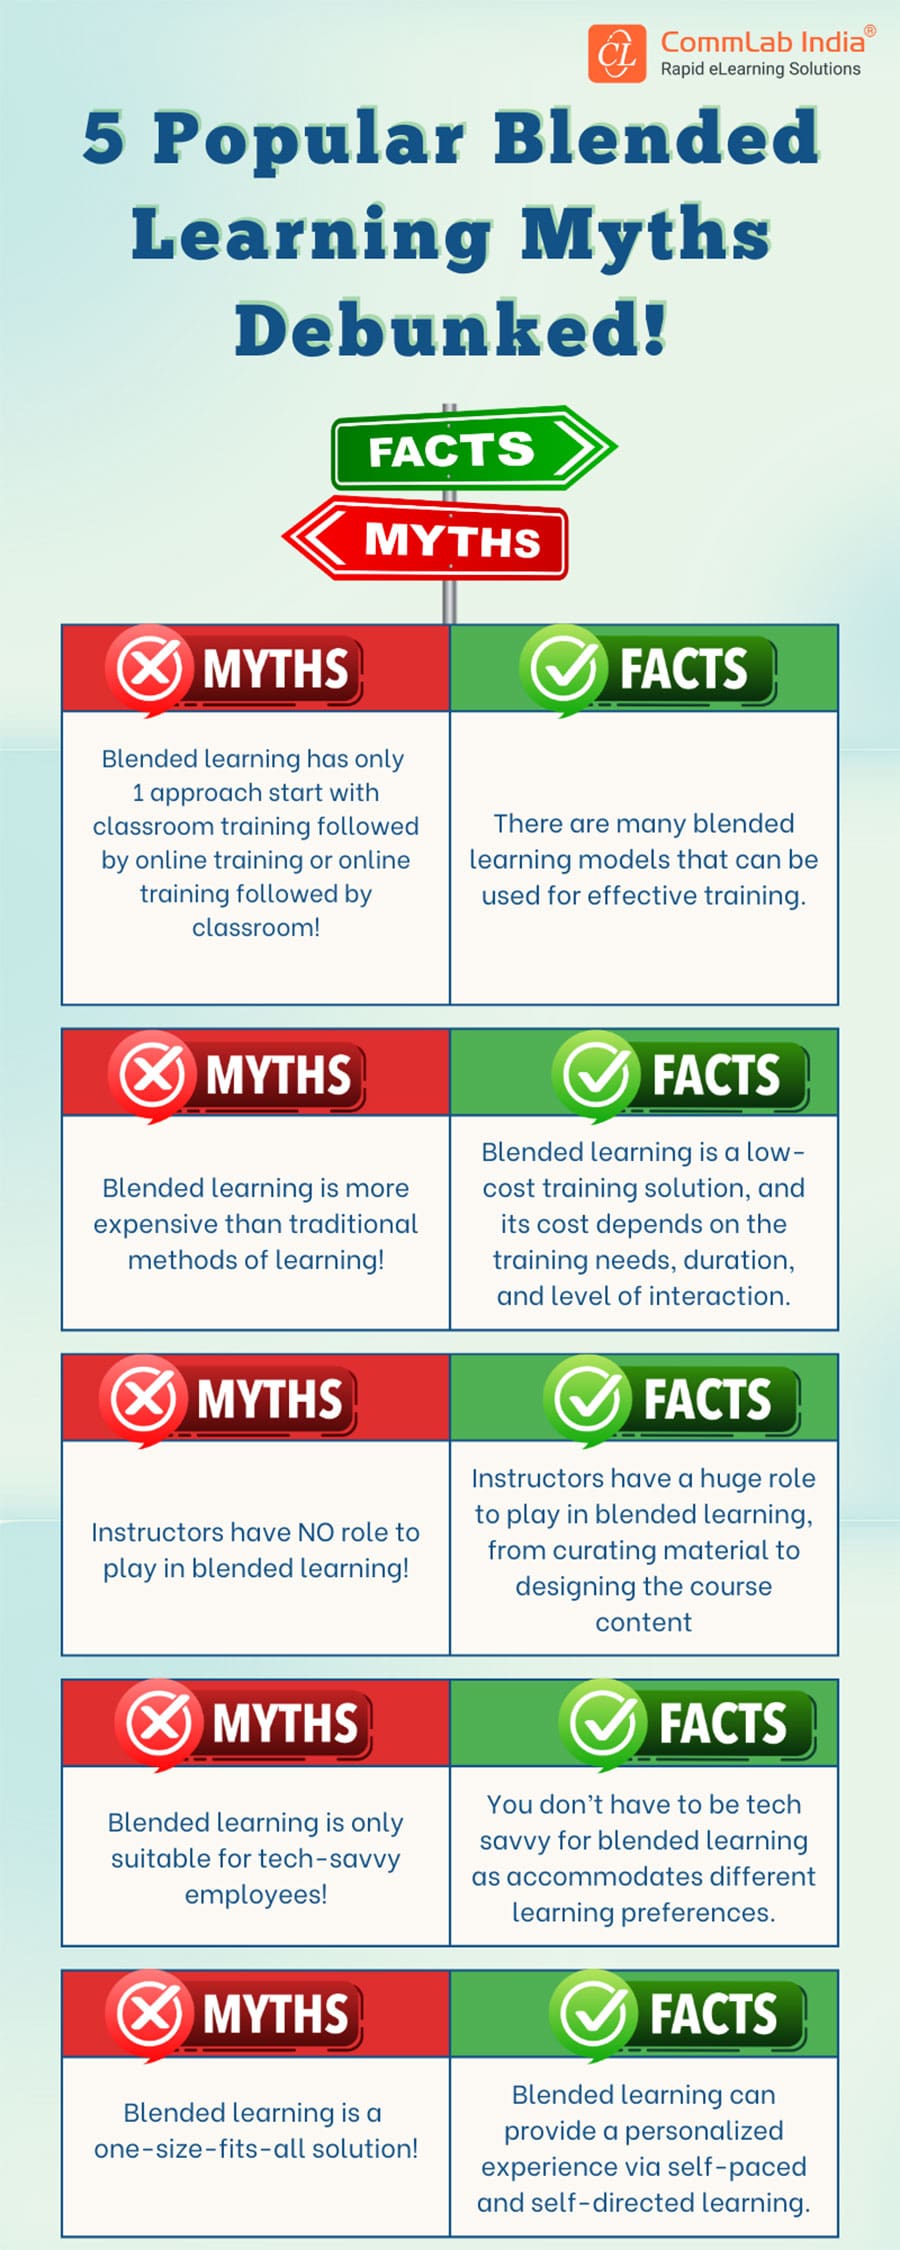 Blended Learning: Debunking Myths and Focusing on Facts